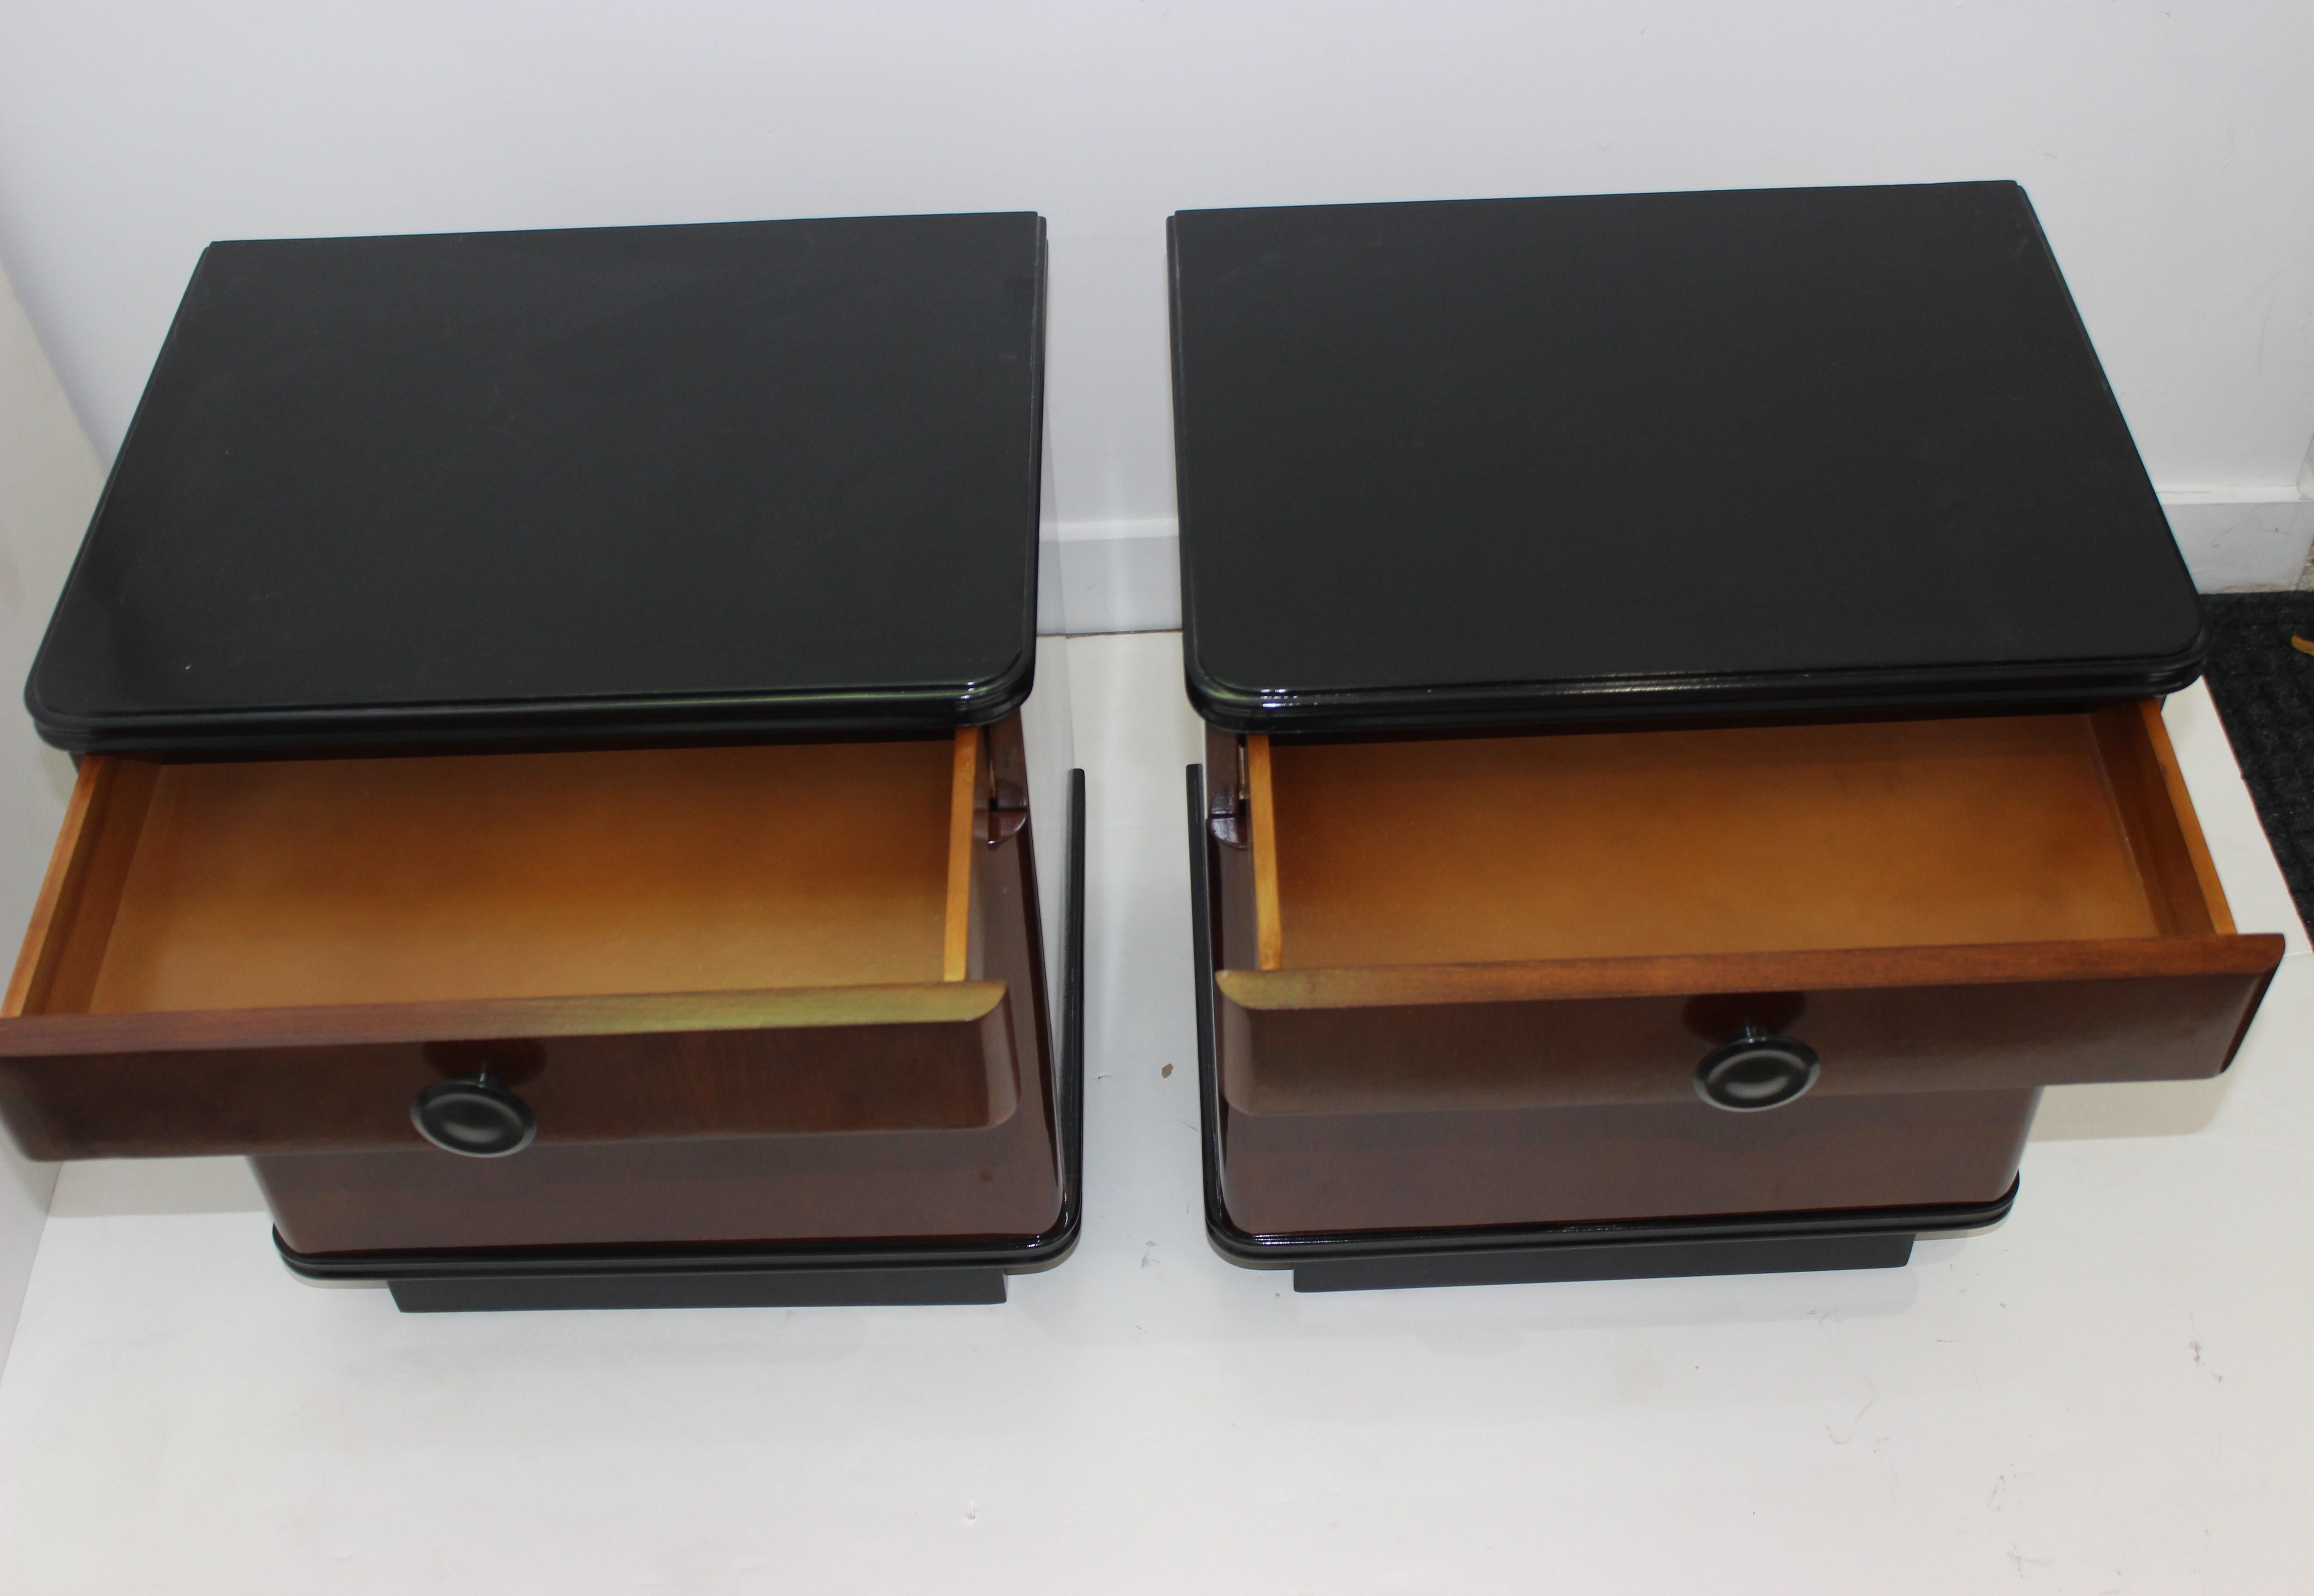 Art Deco nightstands 1930s restored and ebonized, a pair from a Palm Beach estate, recently black lacquered tops and recessed feet, iconic curved corners, each has a removable inner shelf and each has a drawer. Elegant size perfect for a favorite